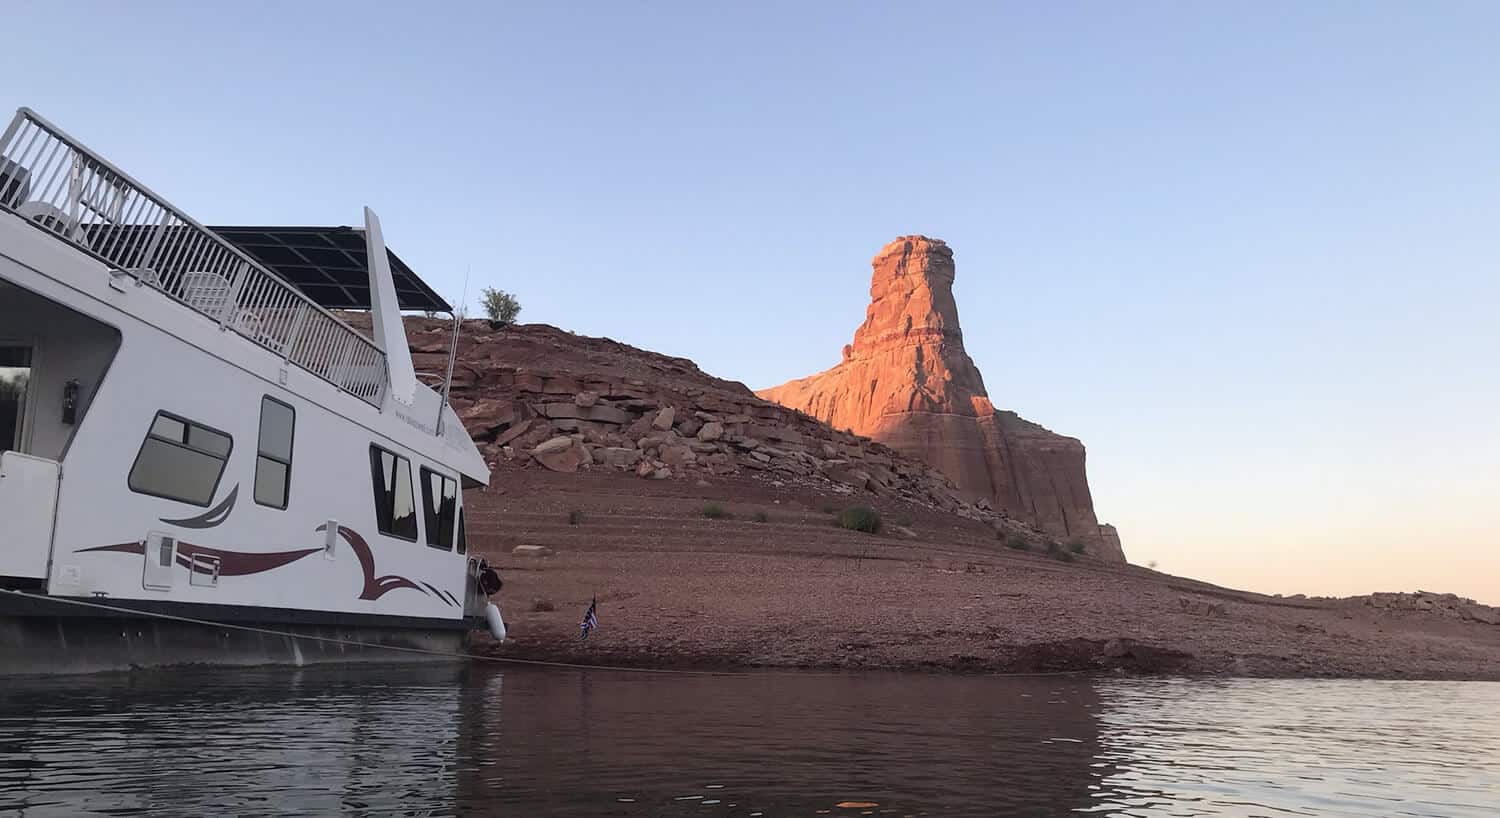 White houseboat docked on beach with balcony with white lawn chairs with tall cathedral rock formation in distance